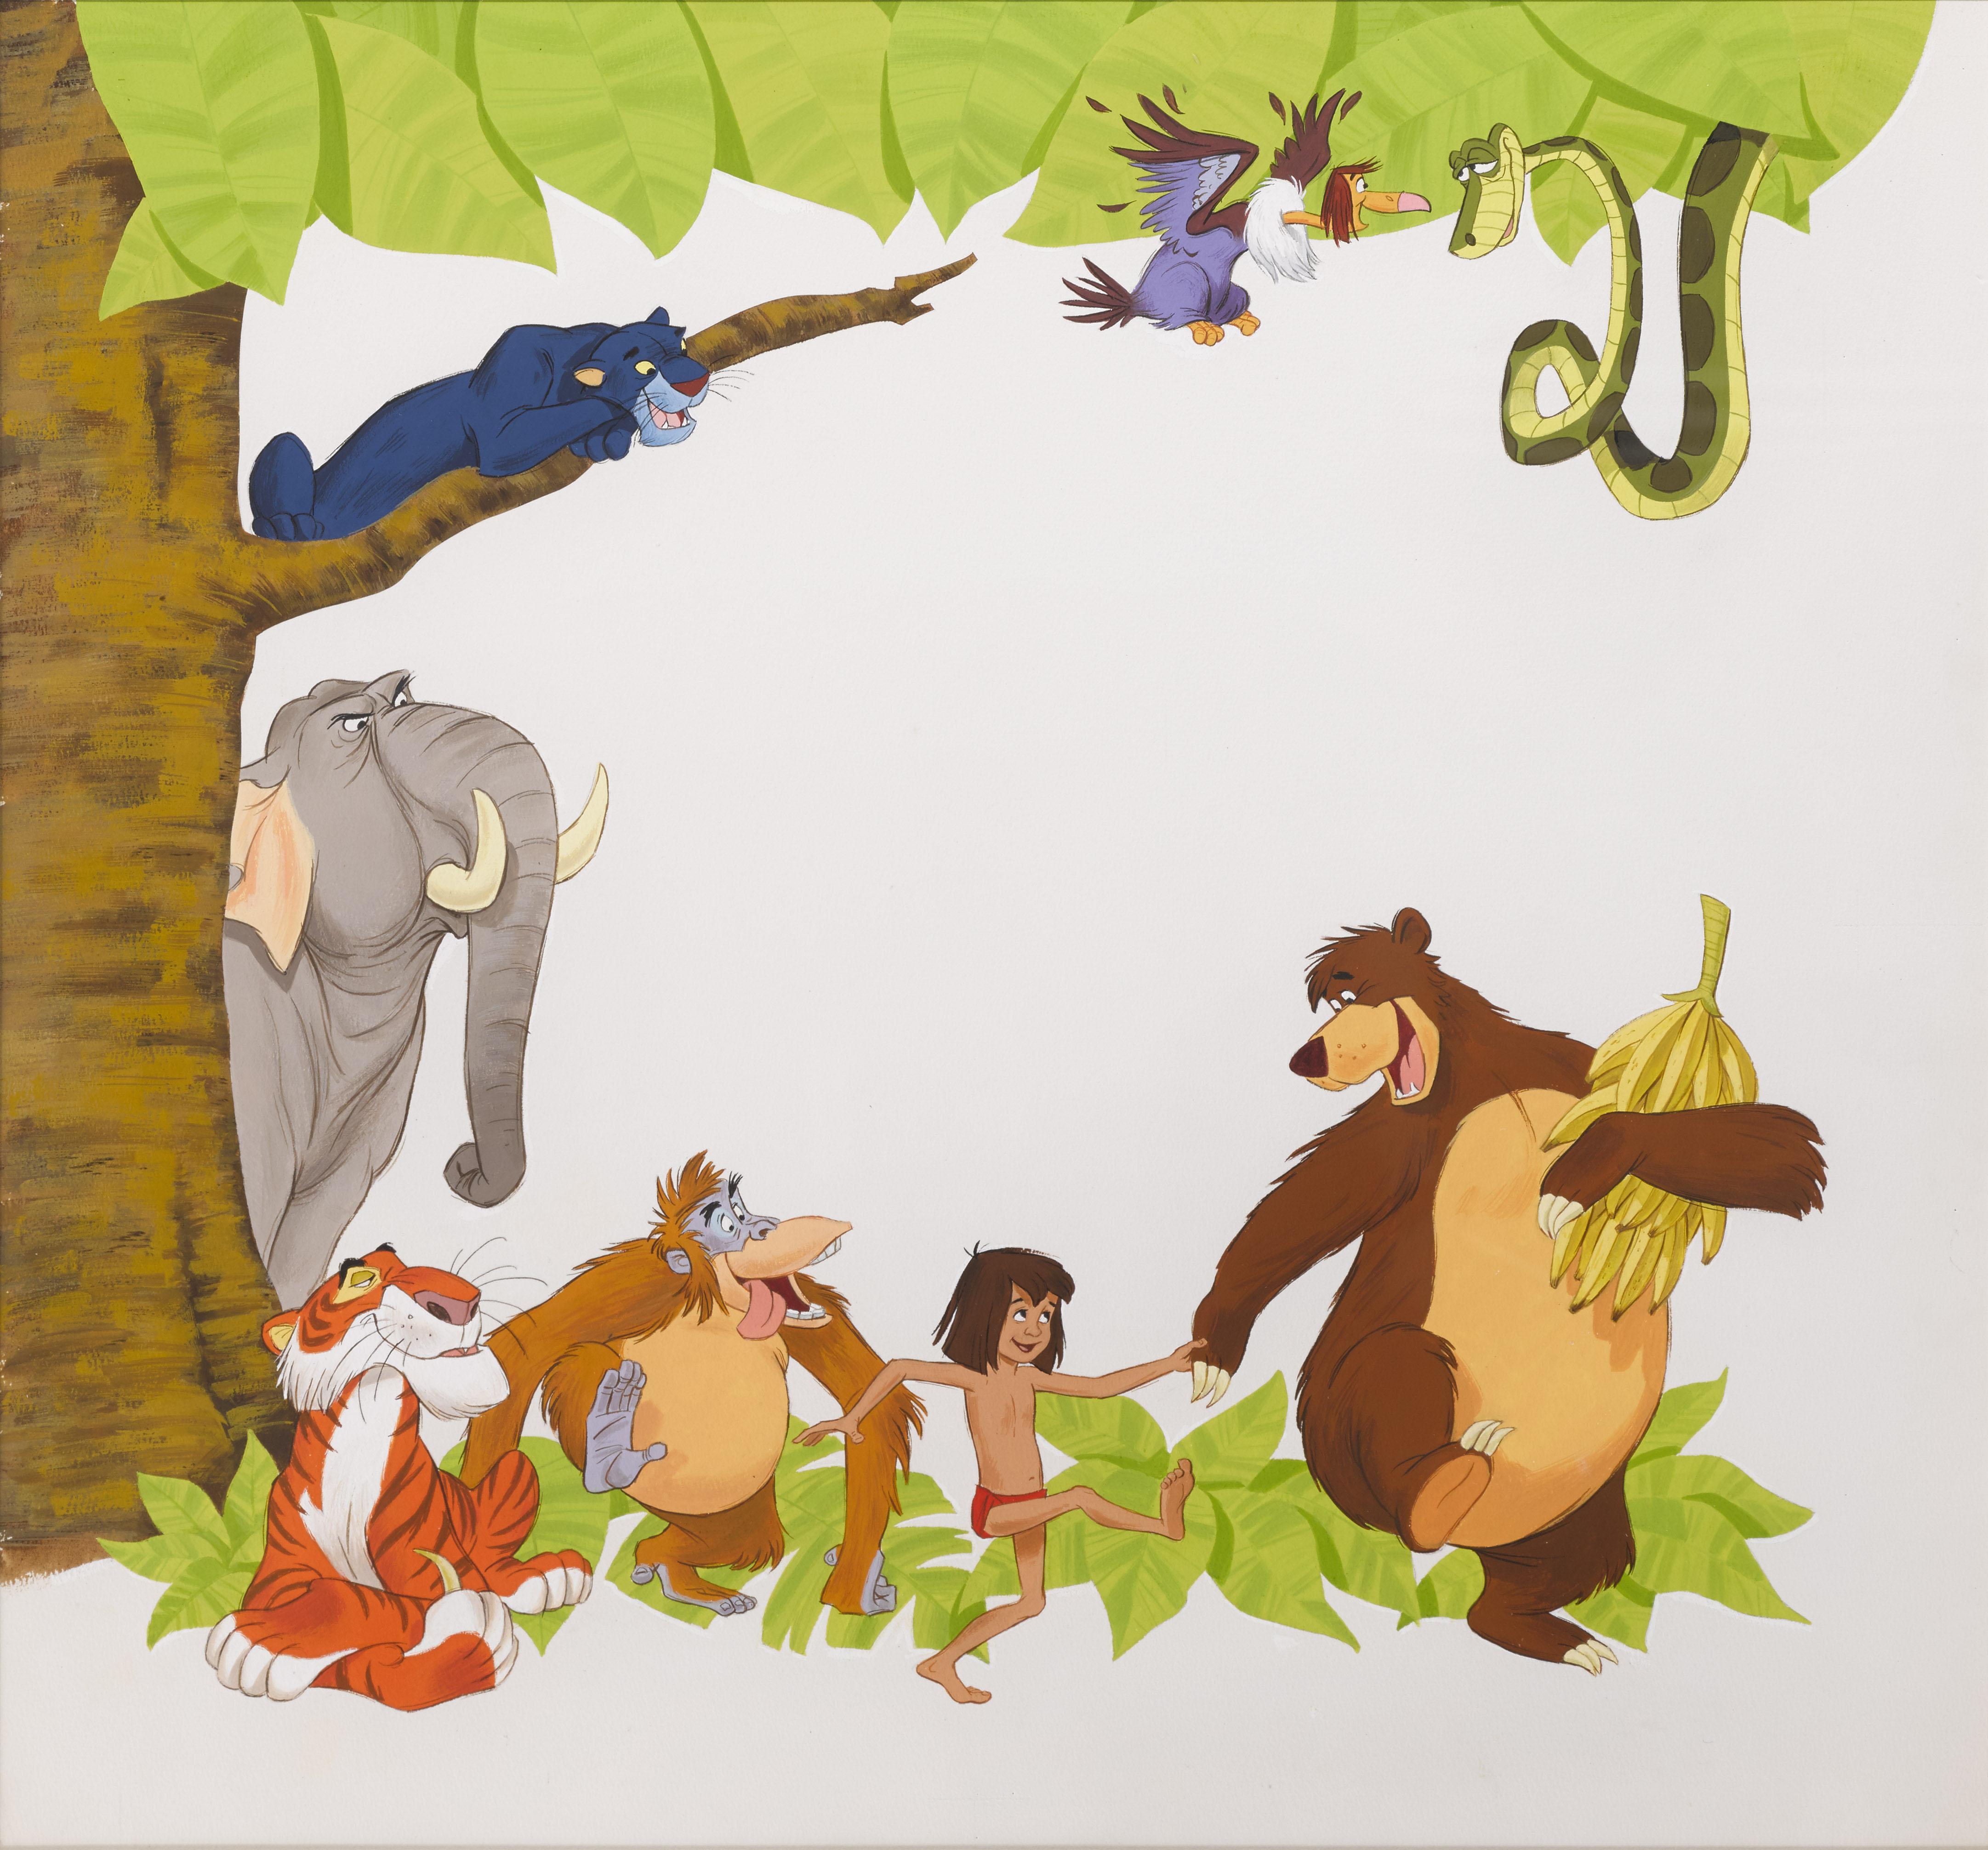 Original artwork used to for the US 81 x 81 in. billboard poster.
The artwork is by Al White. Original artworks rarely surface, as the majority were destroyed.
The Jungle Book, by Rudyard Kipling, was published in 1894. The first screen adaptation